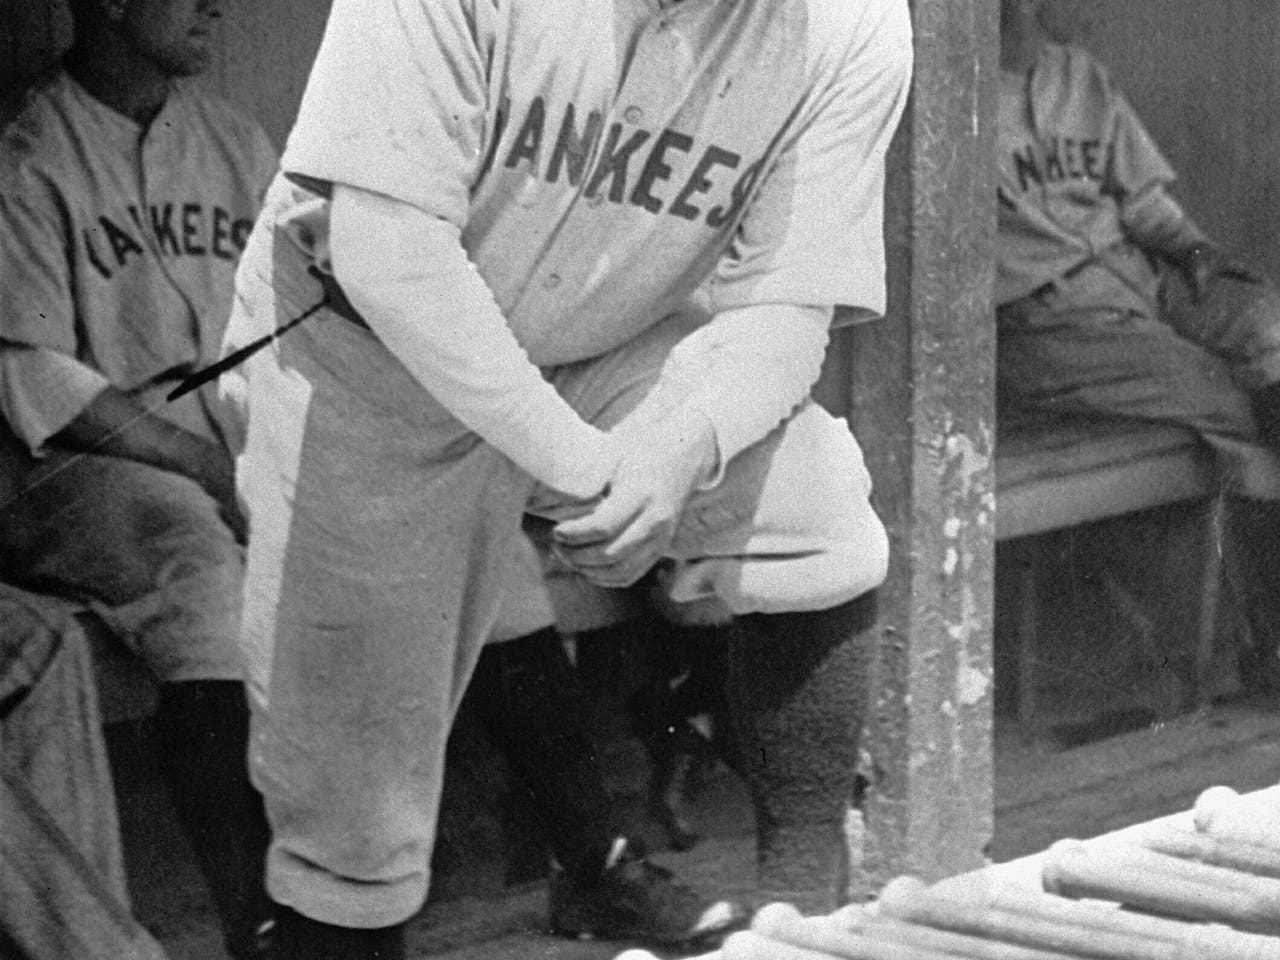 Babe Ruth jersey sells for record $5.64 million at auction